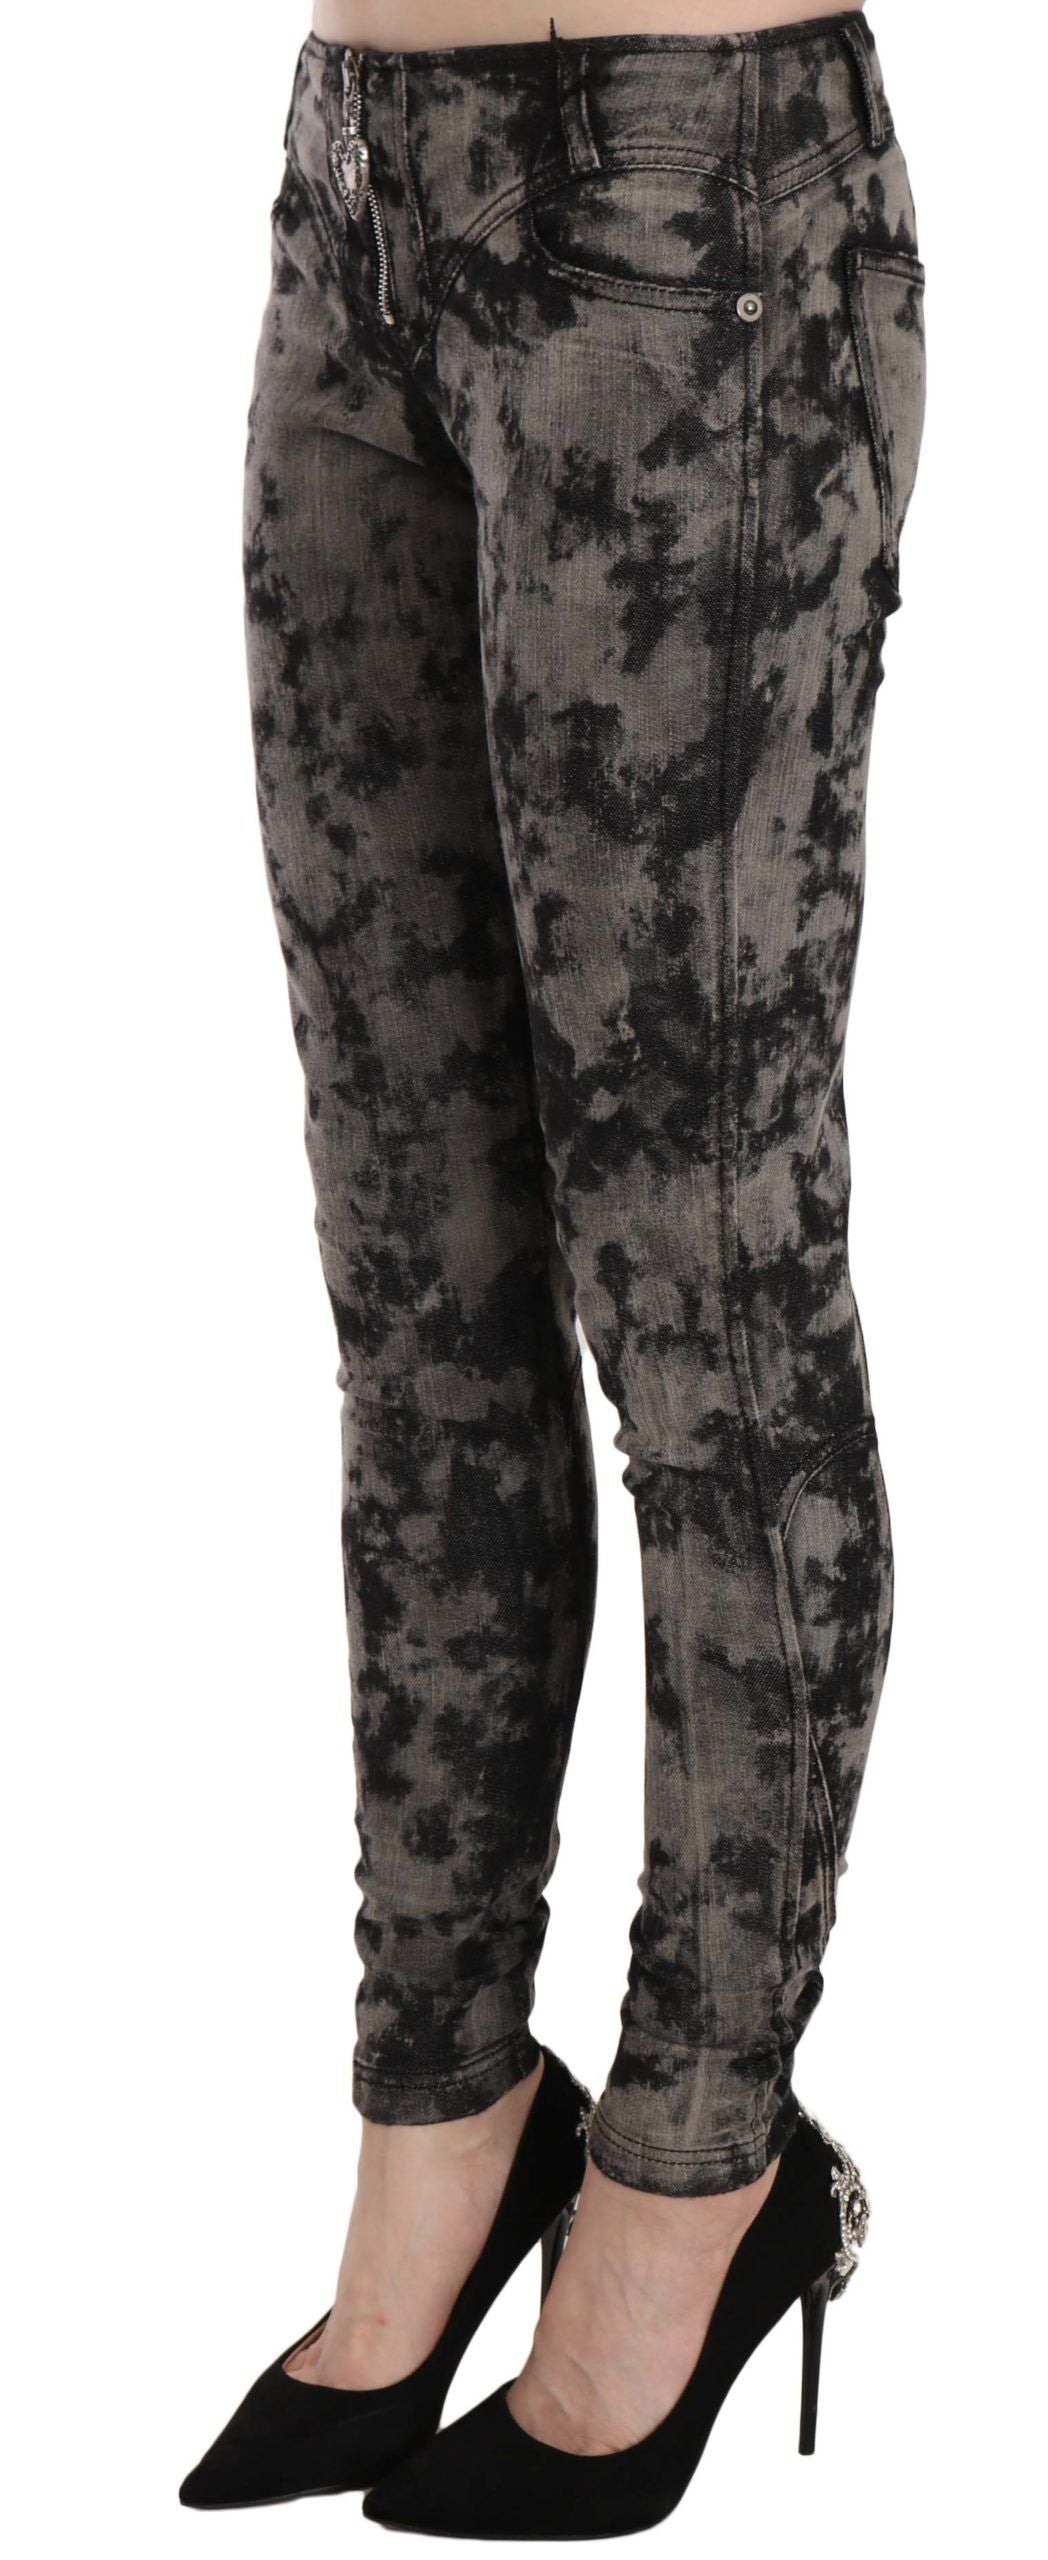 Just Cavalli Black Gray Faded Low Waist Skinny Denim Trousers Jeans - Gio Beverly Hills